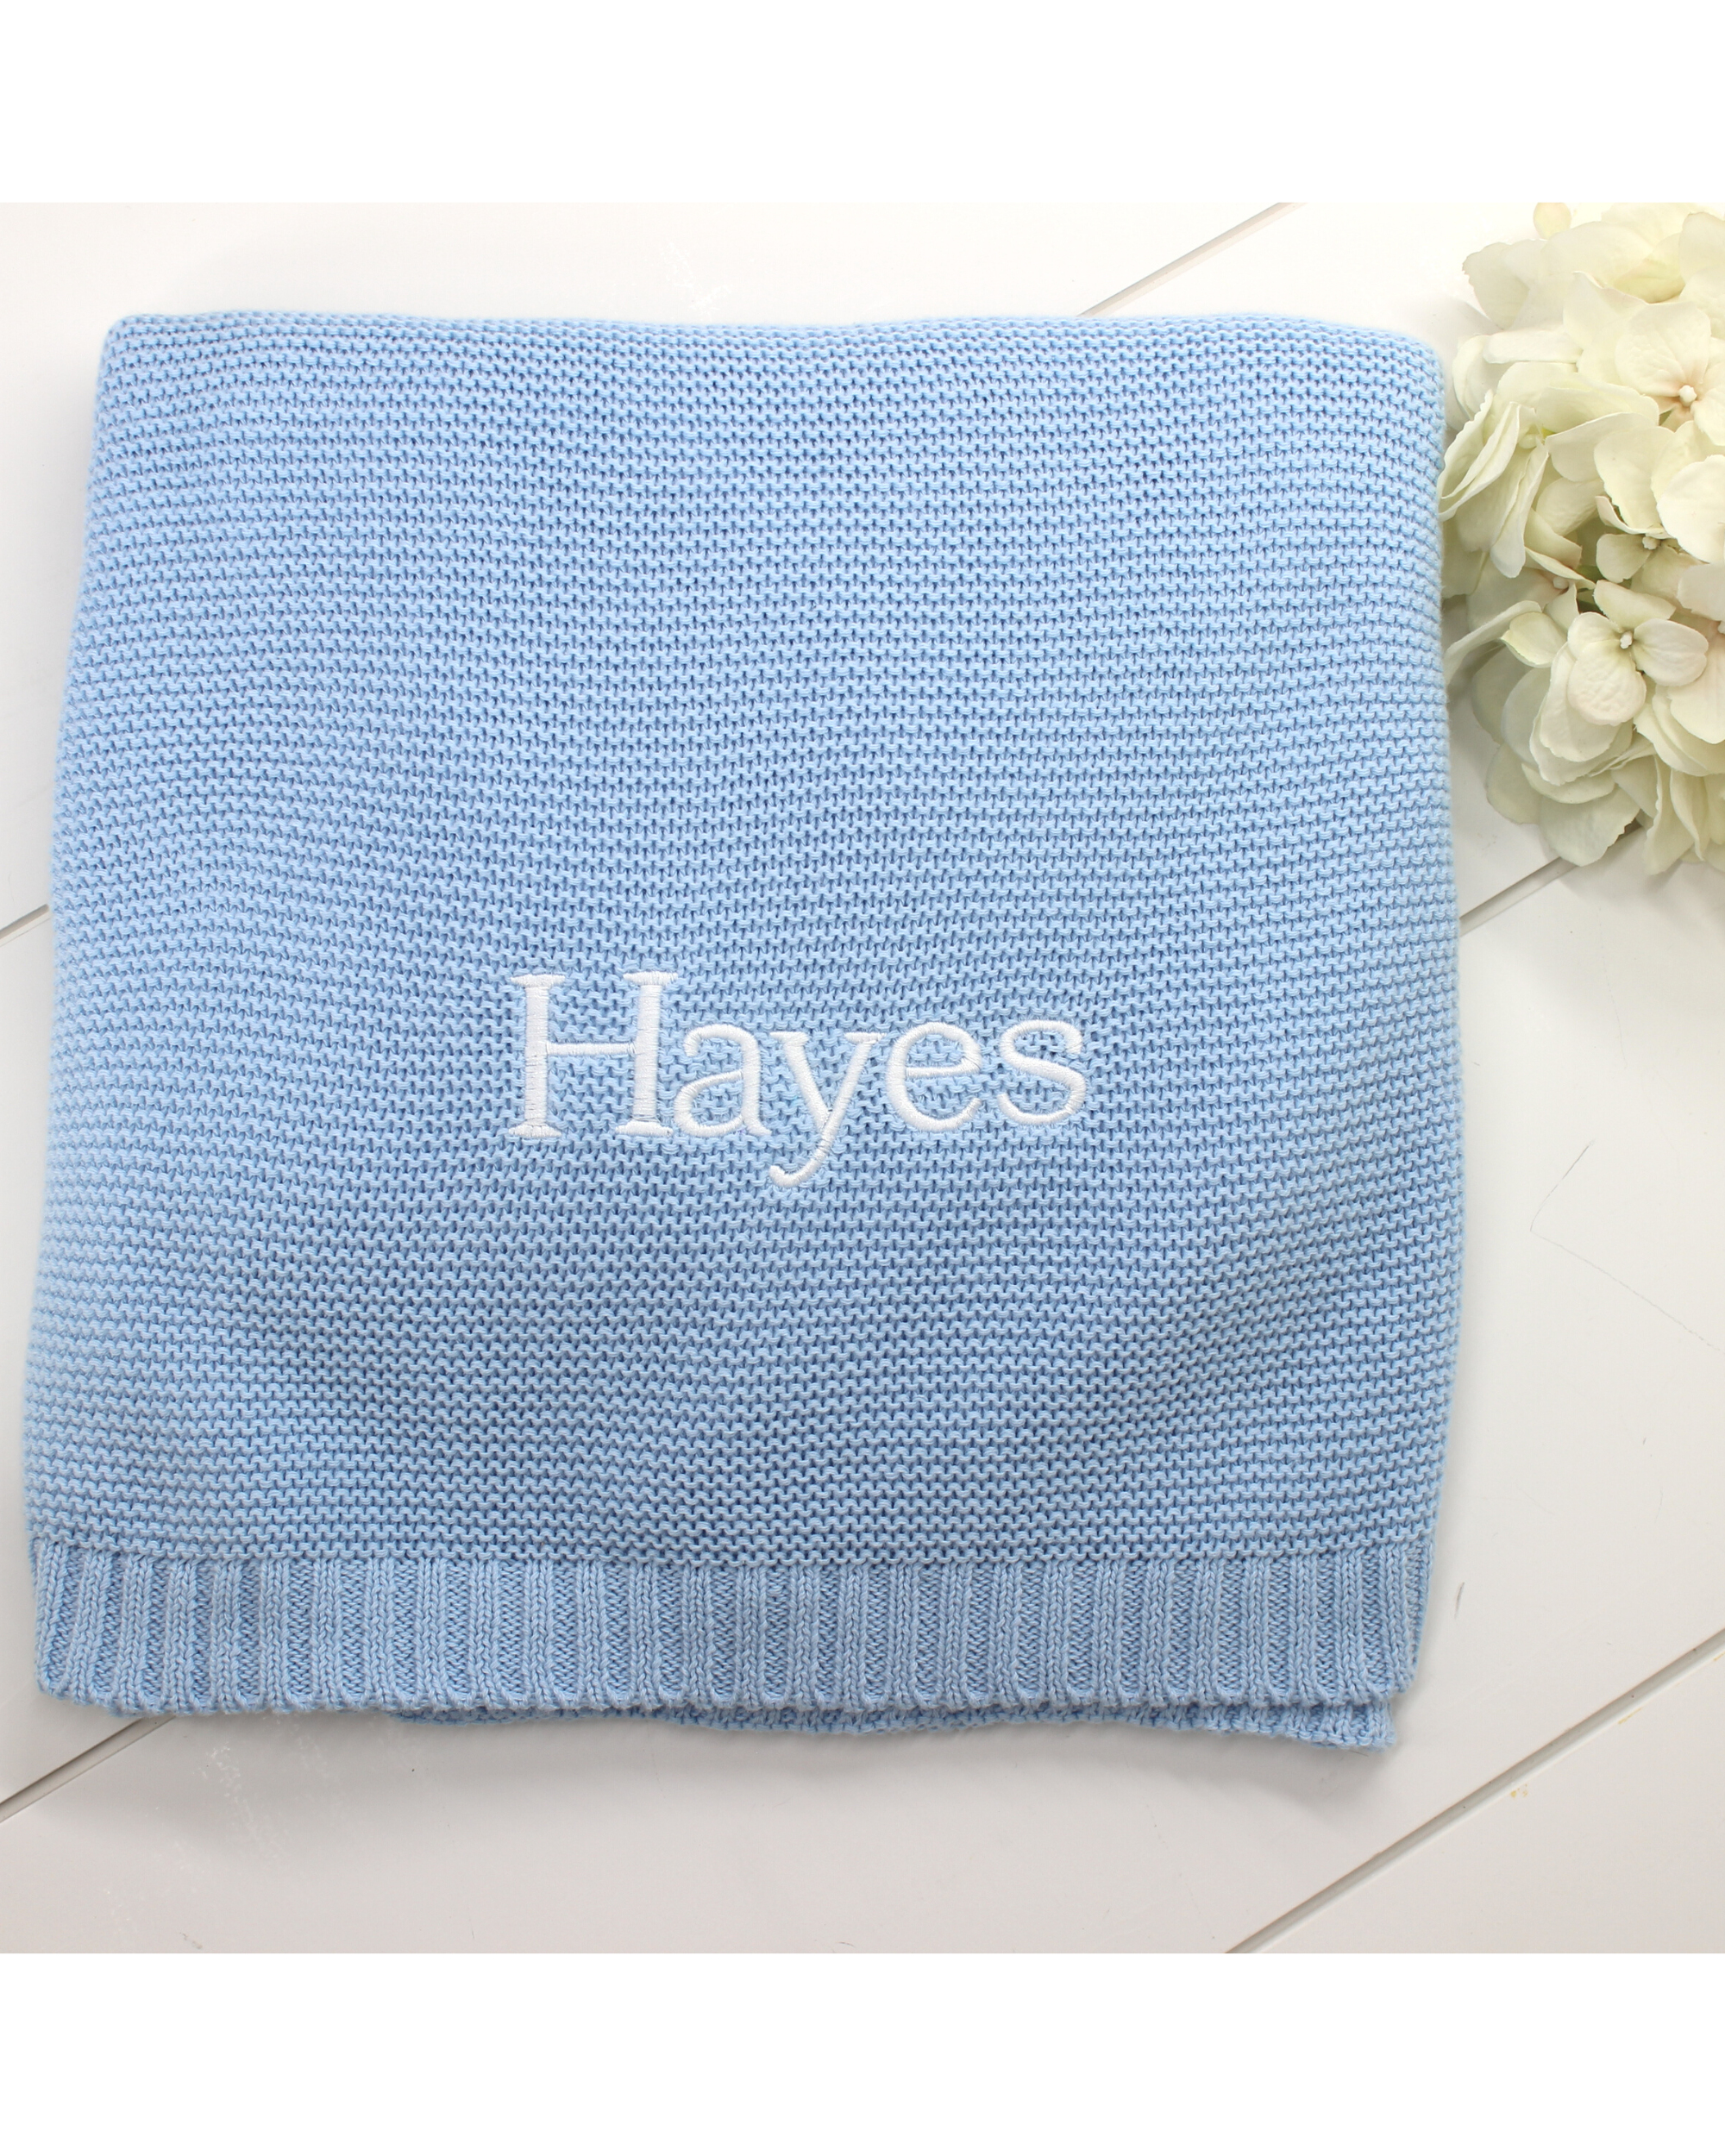 Personalized Knit Stroller Blanket for Baby Boy